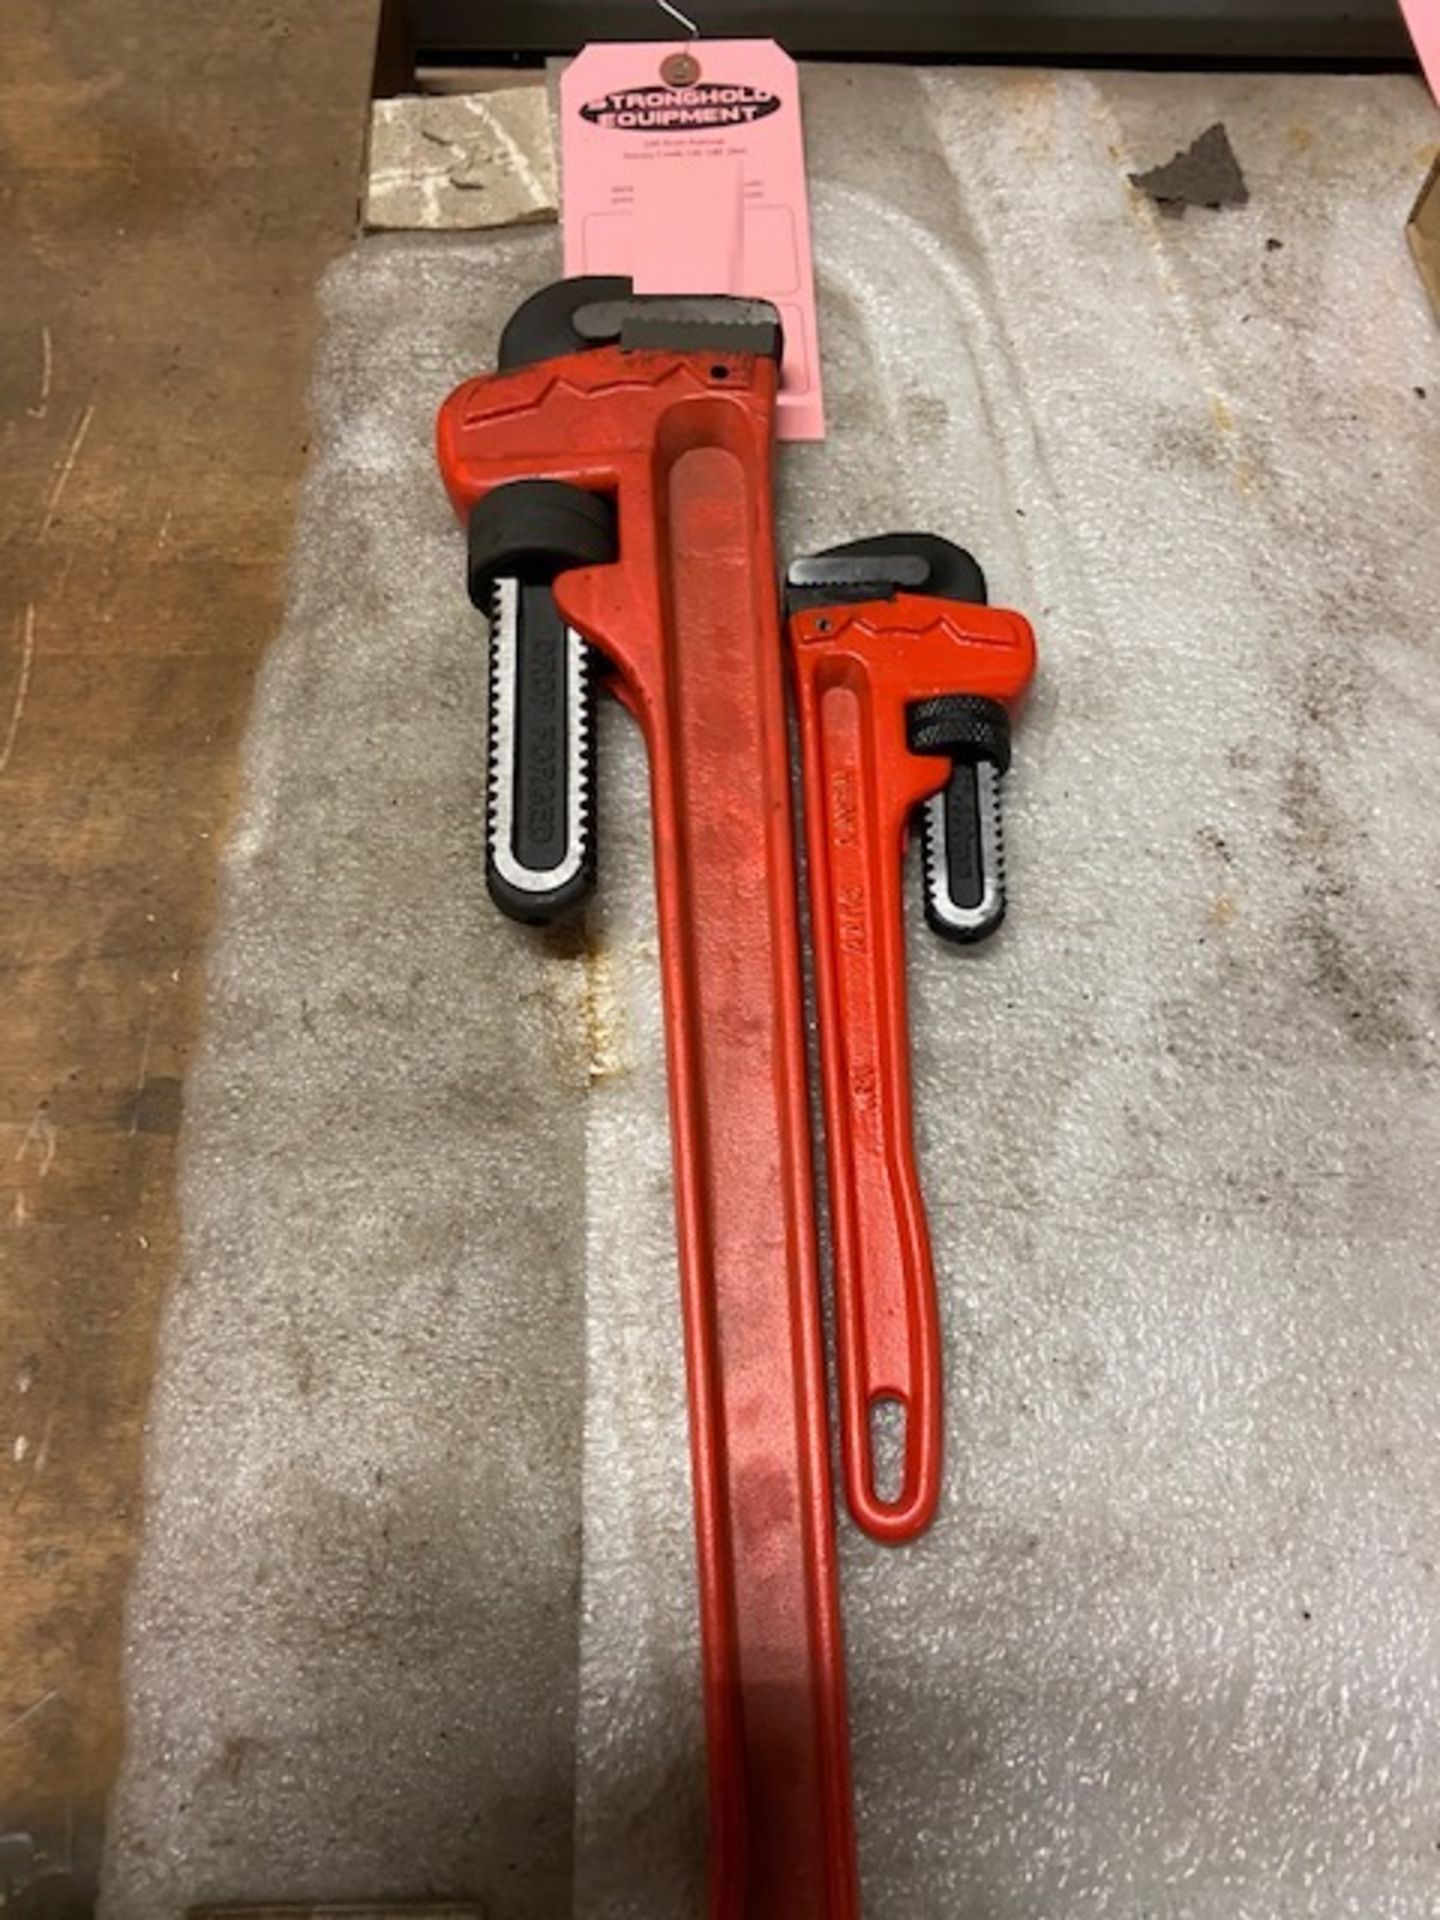 Lot of 2 (2 units) Pipe Wrenches 12" and 24"